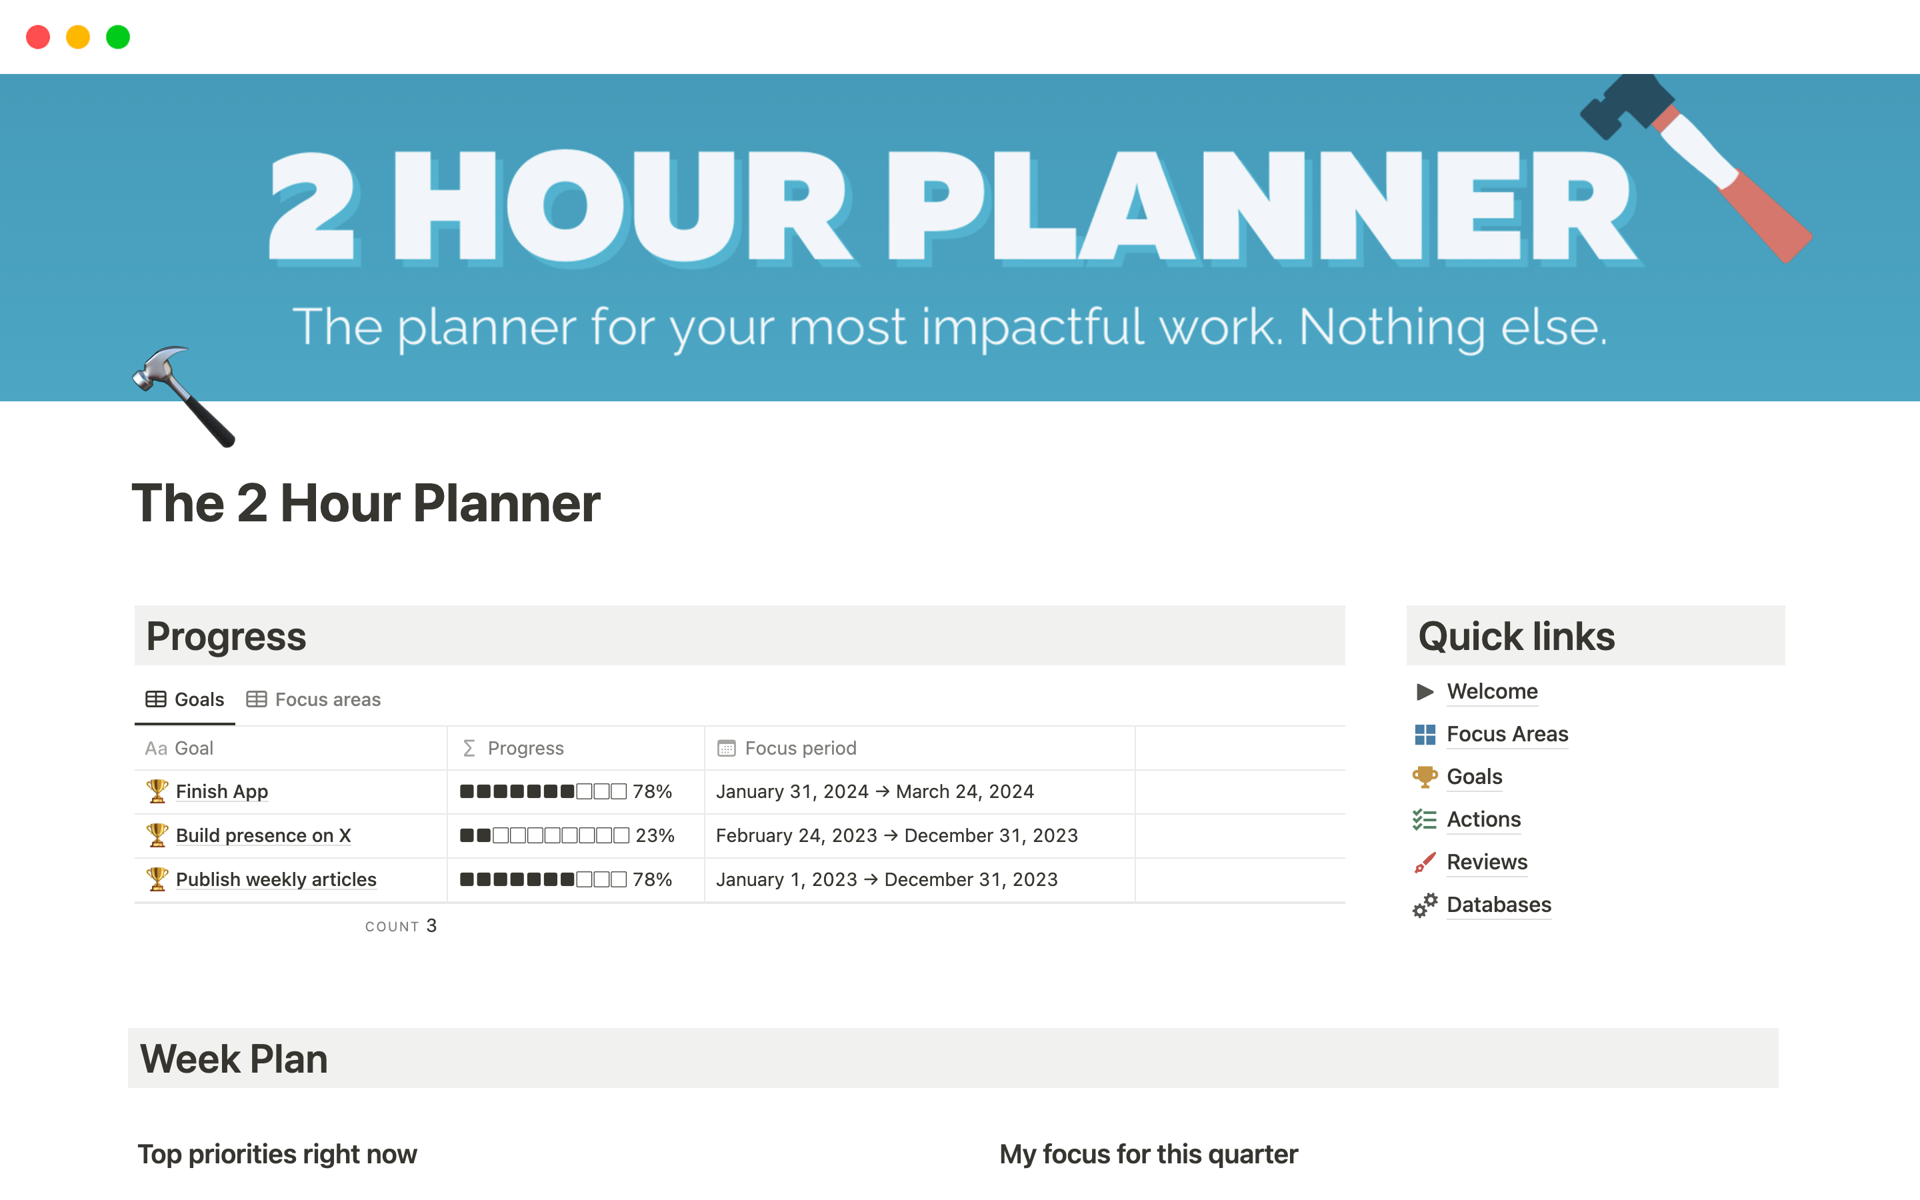 The planner for your most impactful work - nothing else.